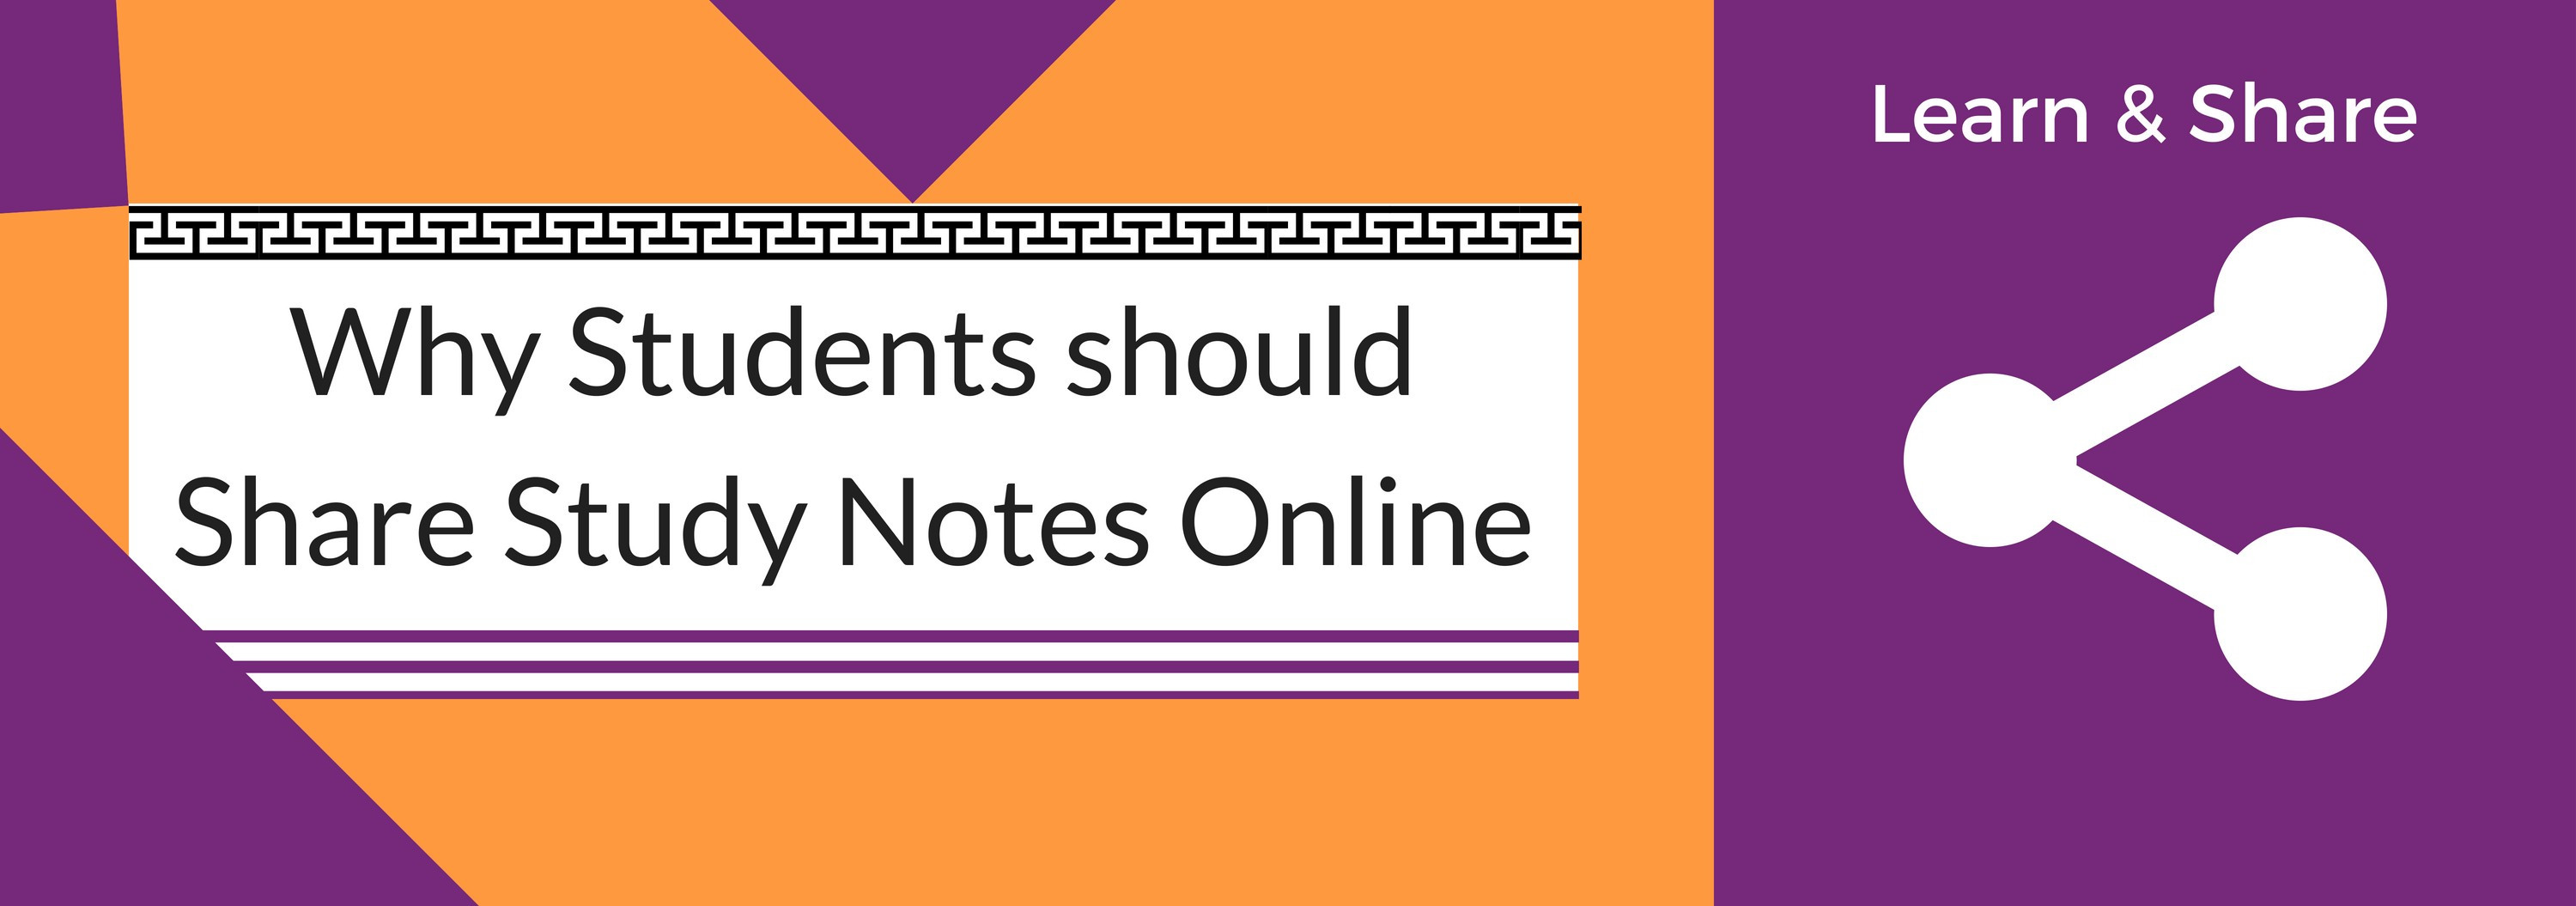 Why Students should Share Study Notes Online